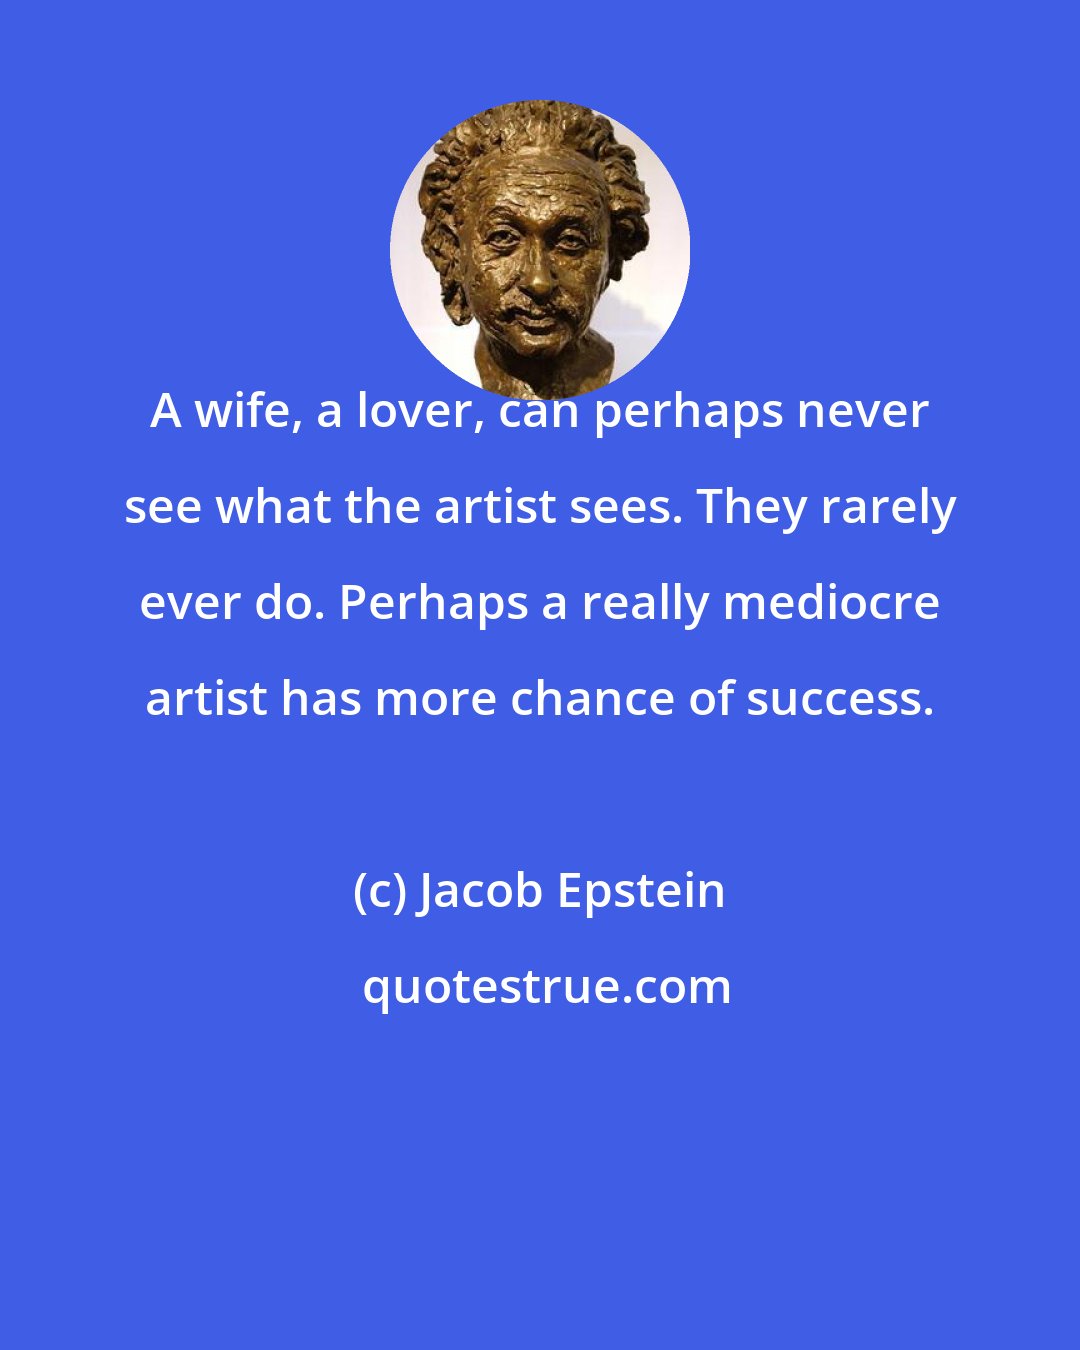 Jacob Epstein: A wife, a lover, can perhaps never see what the artist sees. They rarely ever do. Perhaps a really mediocre artist has more chance of success.